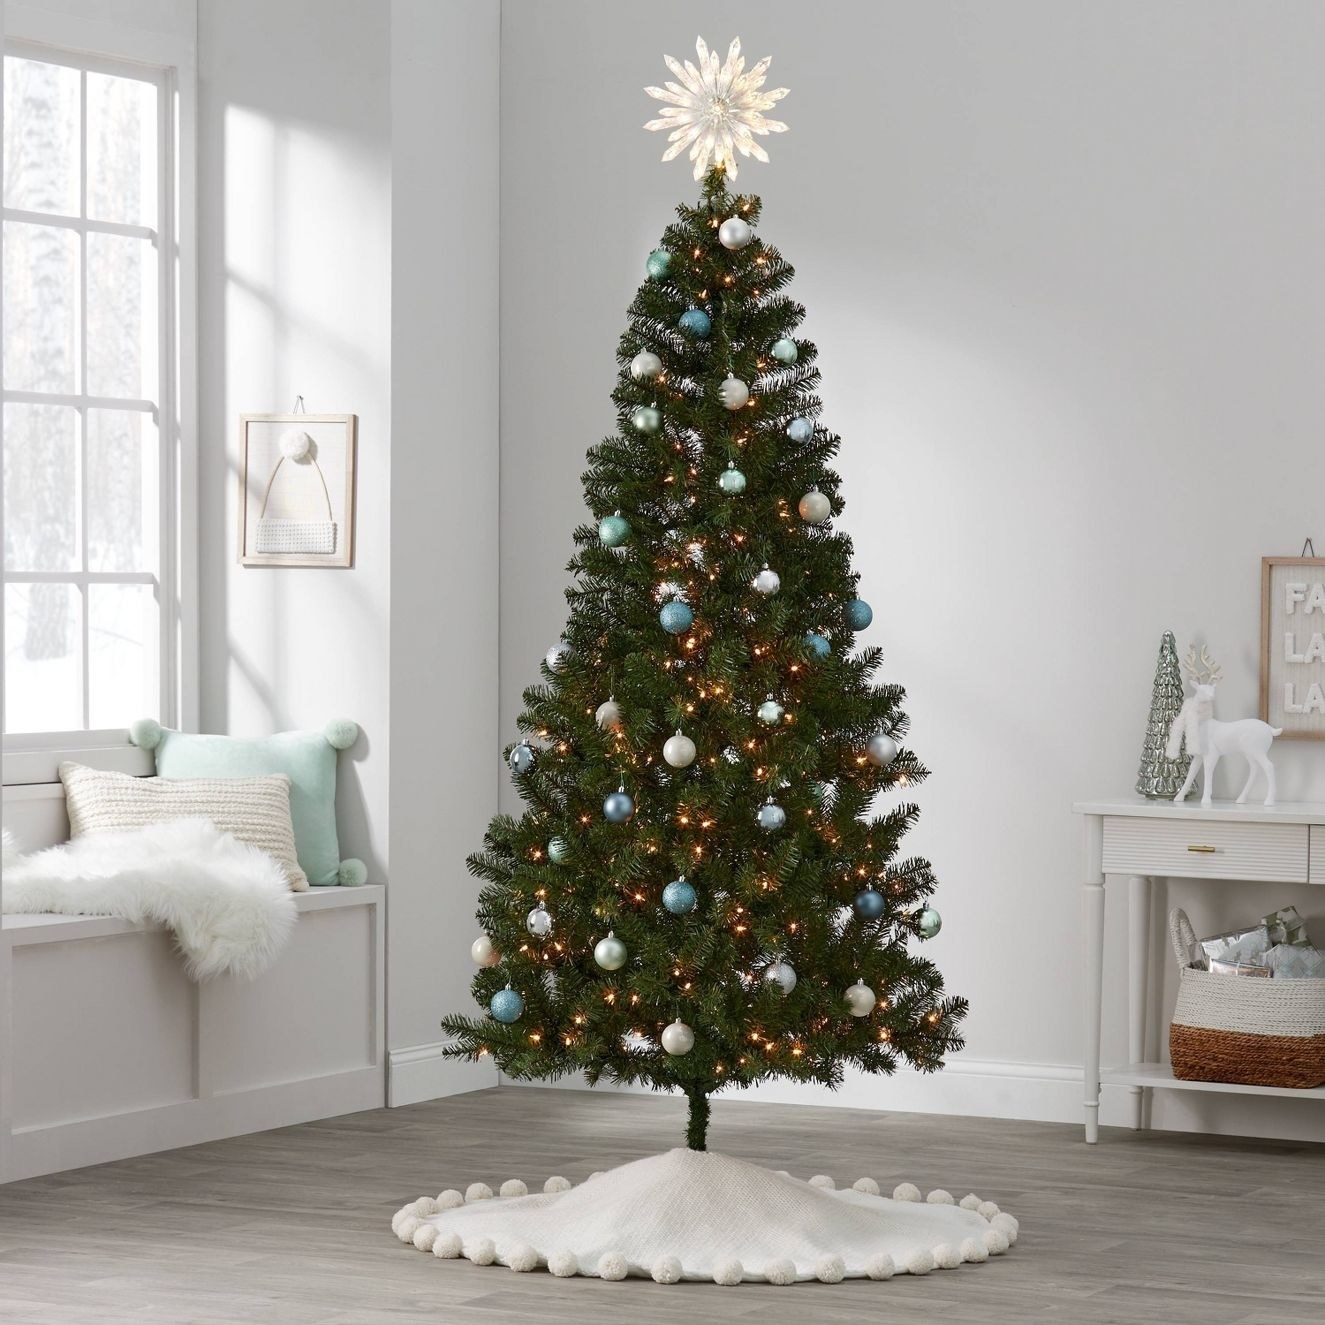 The tree with ornaments in a living room